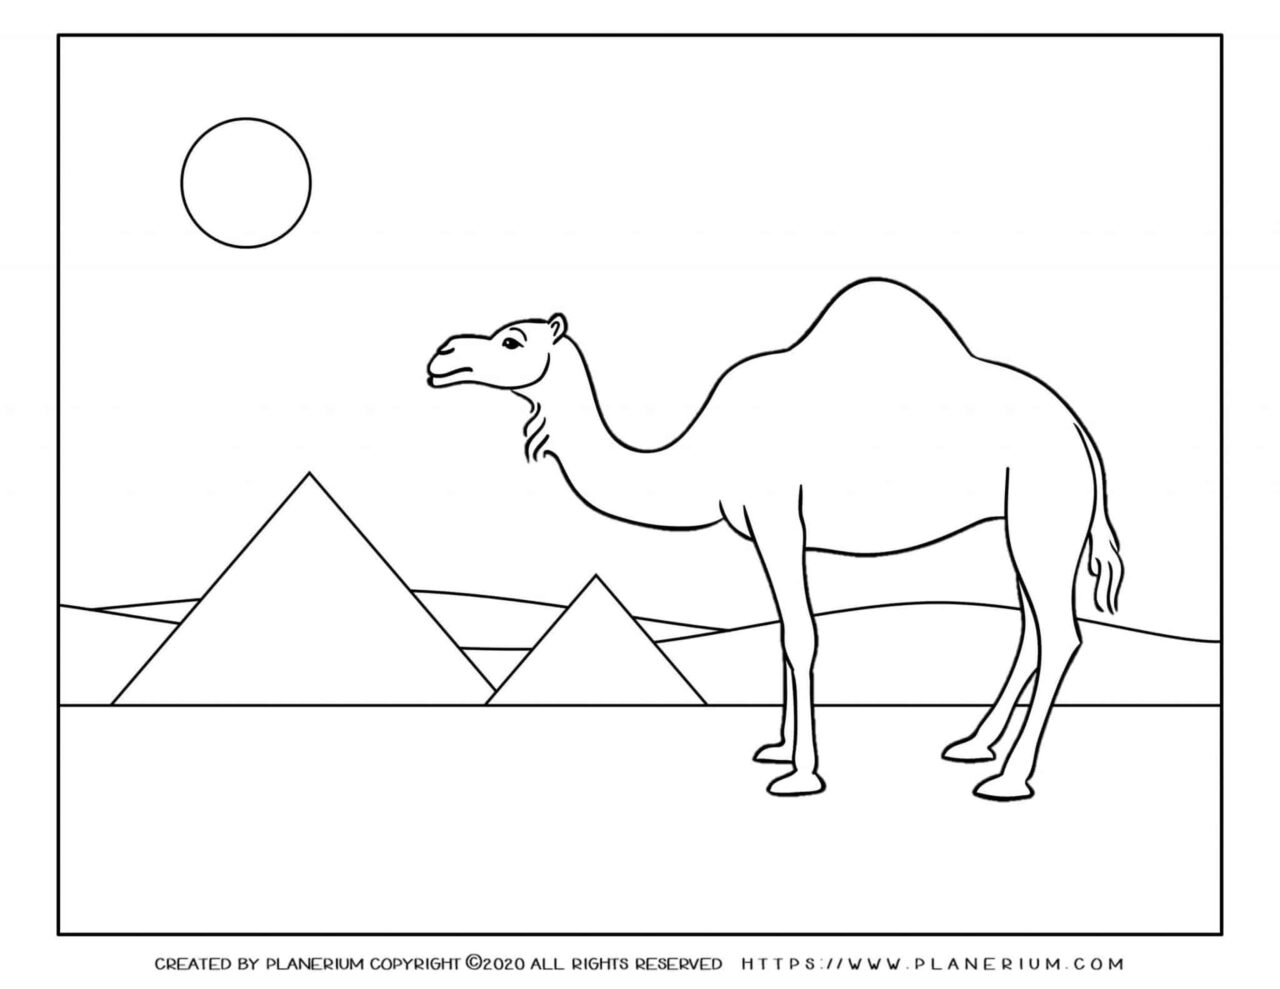 Passover coloring page - Camel and Pyramids